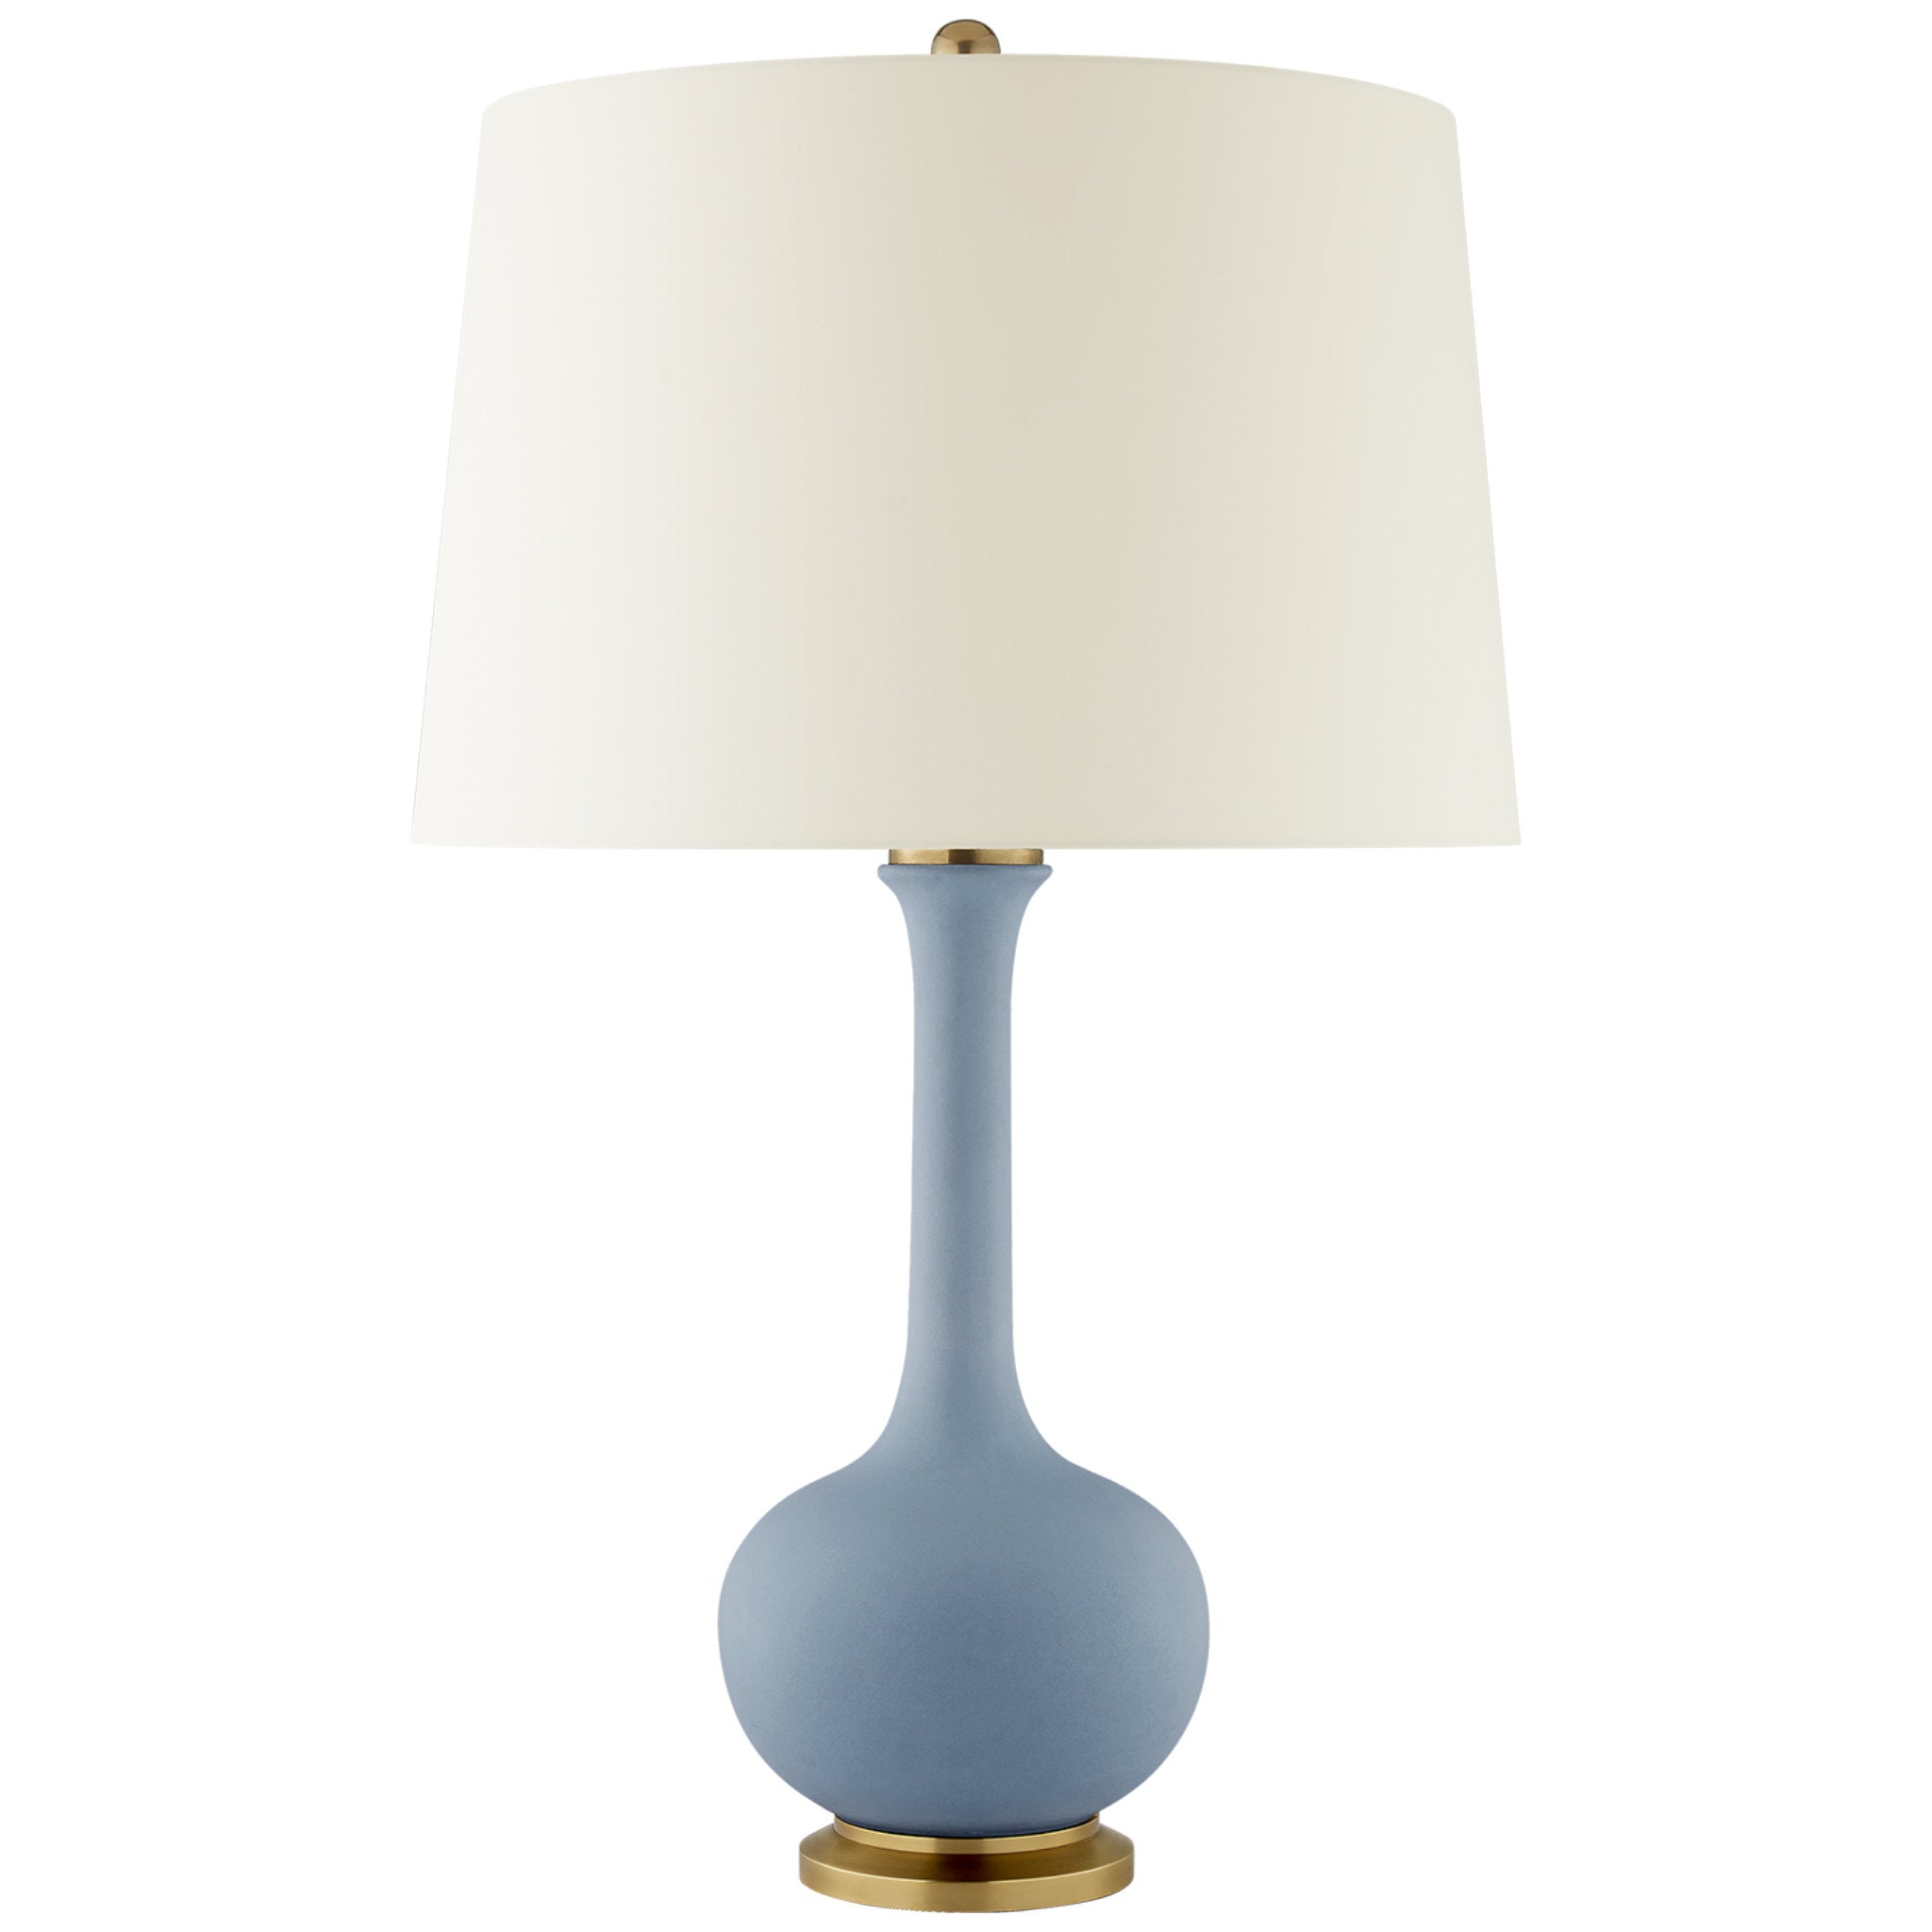 Christopher Spitzmiller Coy Medium Table Lamp in Matte Sky Blue with Natural Percale Shade